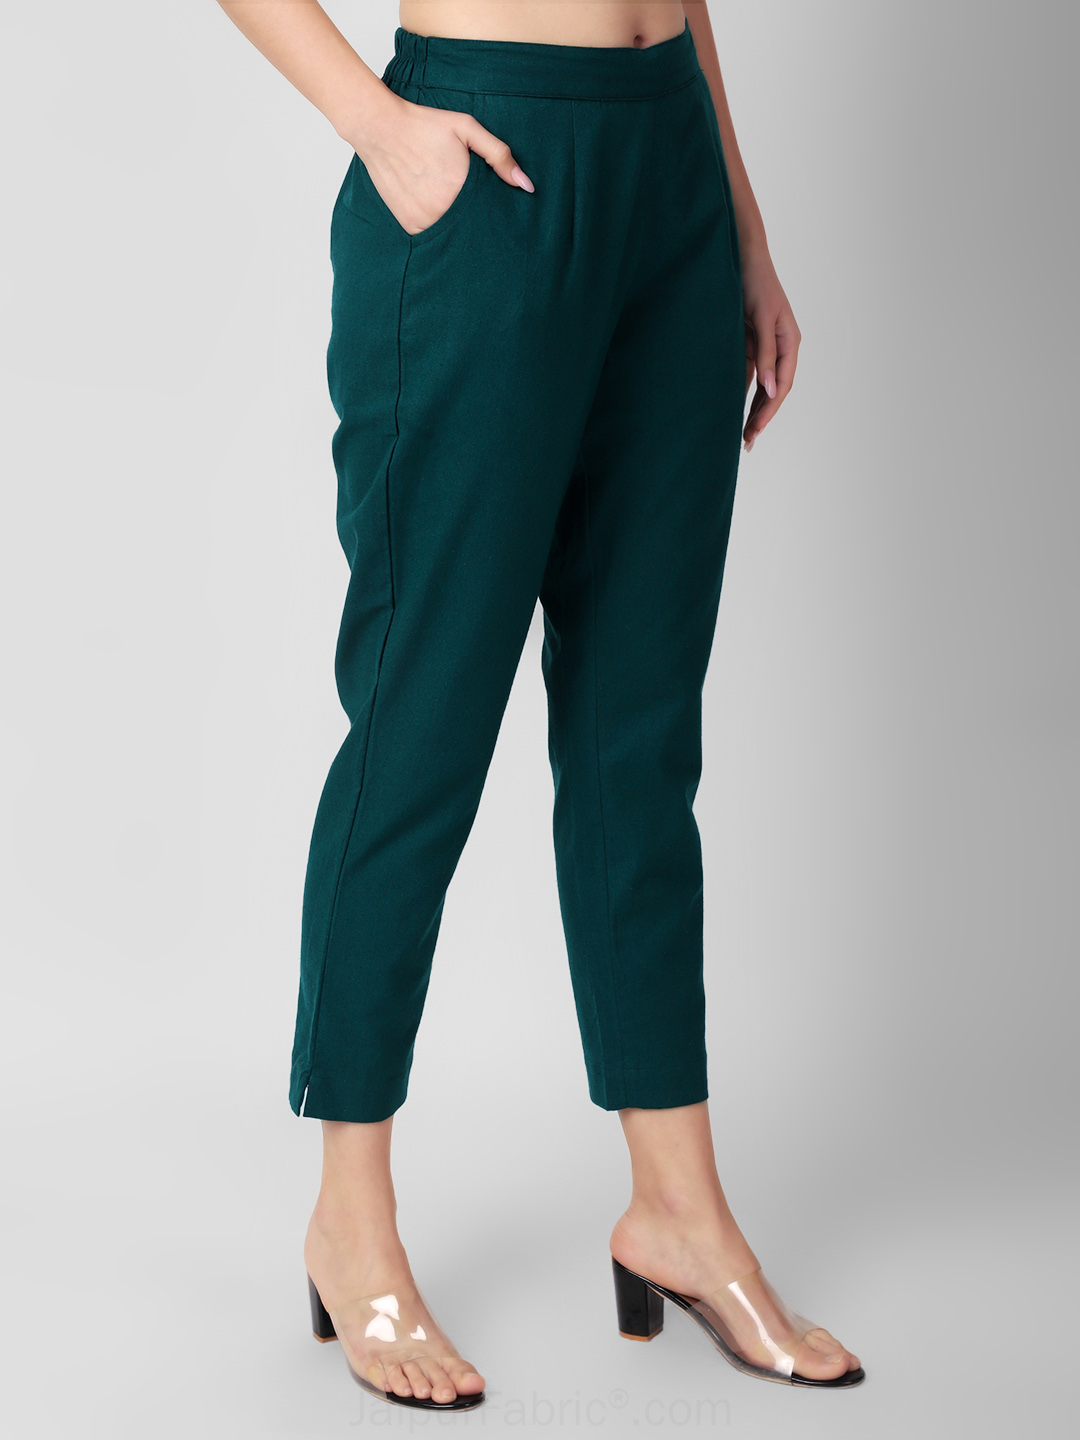 Bottle Green Women Cotton Pants casual and semi formal daily trousers